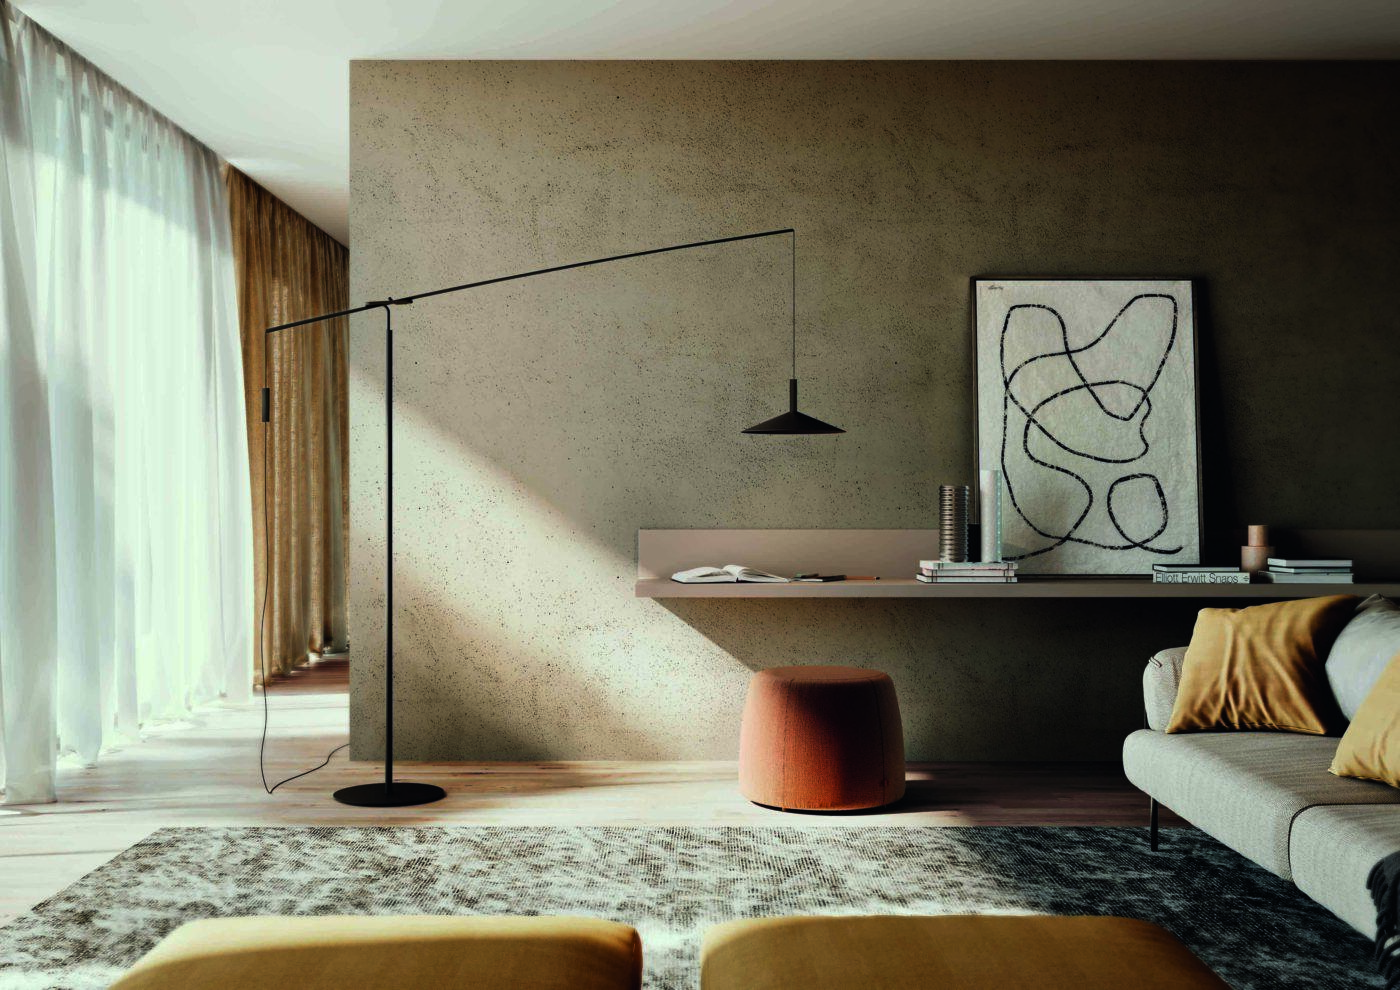 Rustic interiors with modern art on wall and adjustable stainless steel designer floor lamp Singapore -  ‘Altura Floor Lamp’ by Penta.